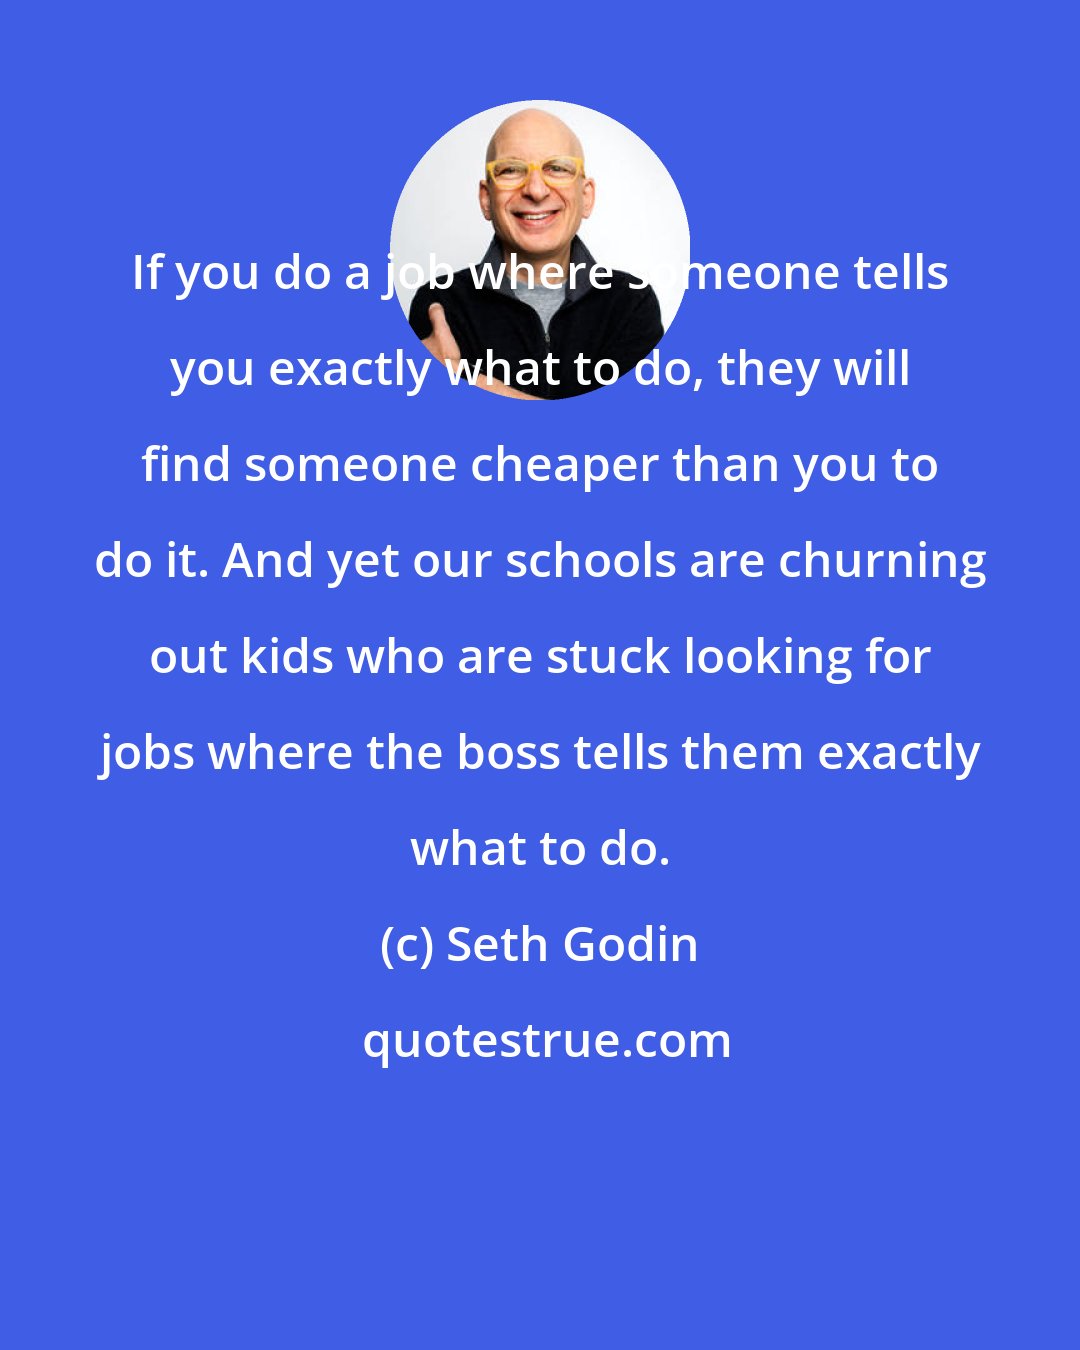 Seth Godin: If you do a job where someone tells you exactly what to do, they will find someone cheaper than you to do it. And yet our schools are churning out kids who are stuck looking for jobs where the boss tells them exactly what to do.